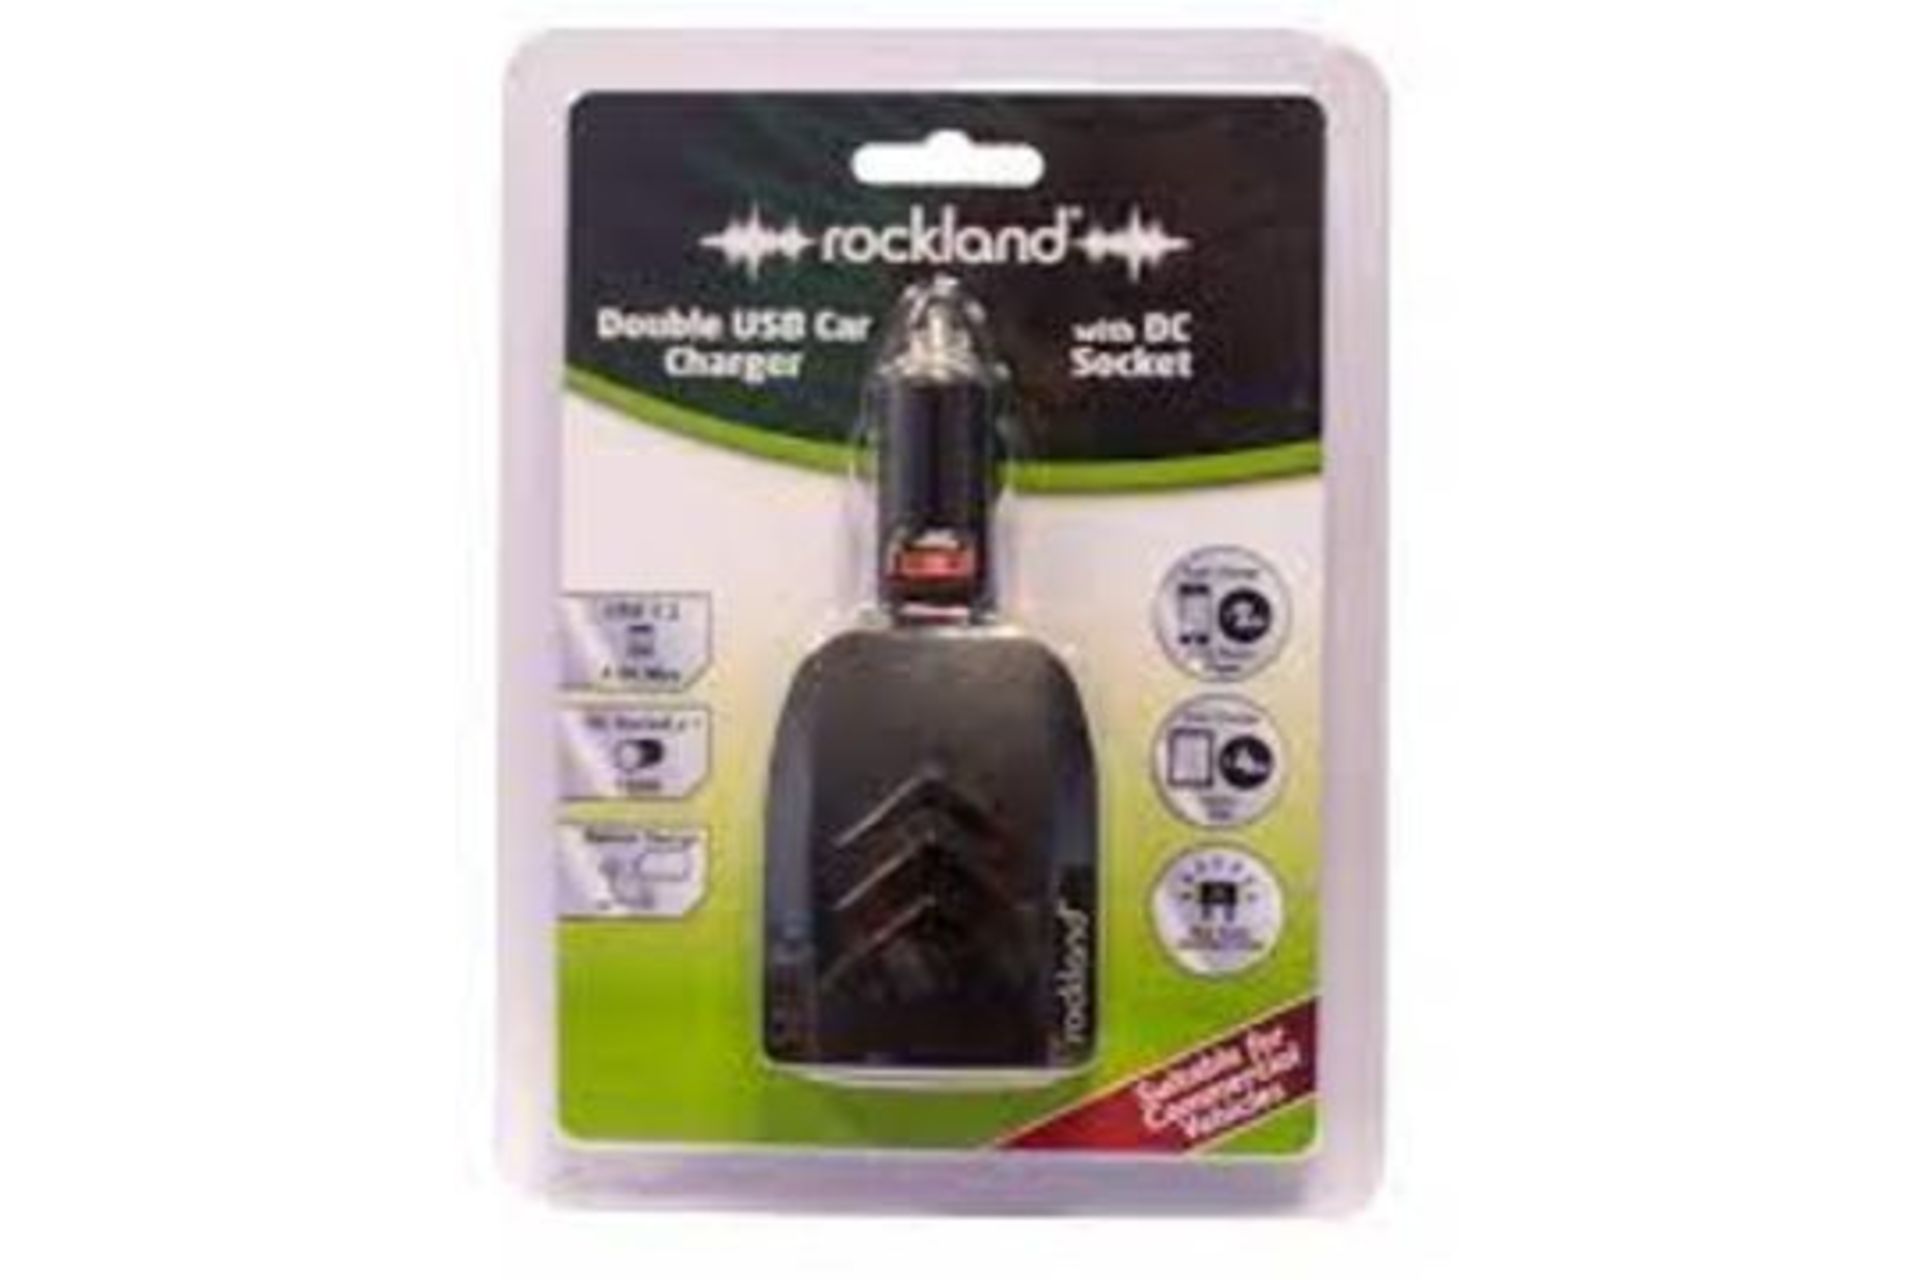 54 X NEW PACKAGED ROCKLAND DOUBLE USB CAR CHARGER WITH DC SOCKET. RRP £15 EACH. ROW 19